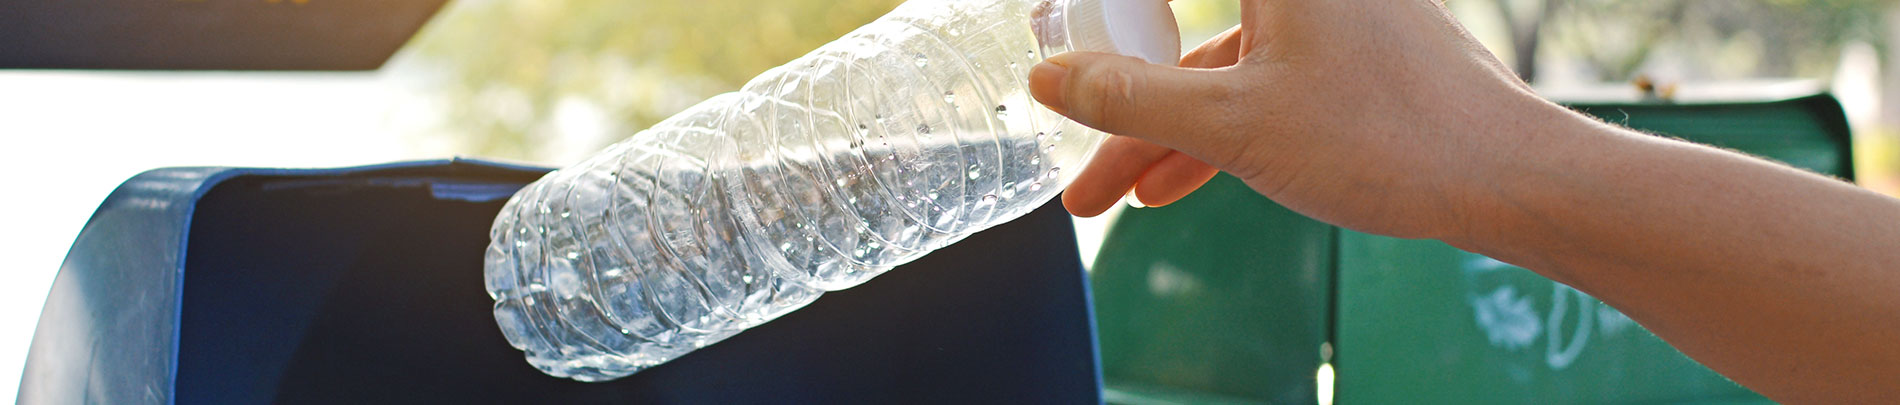 A close up of a person placing a water bottle into a recycling bin.